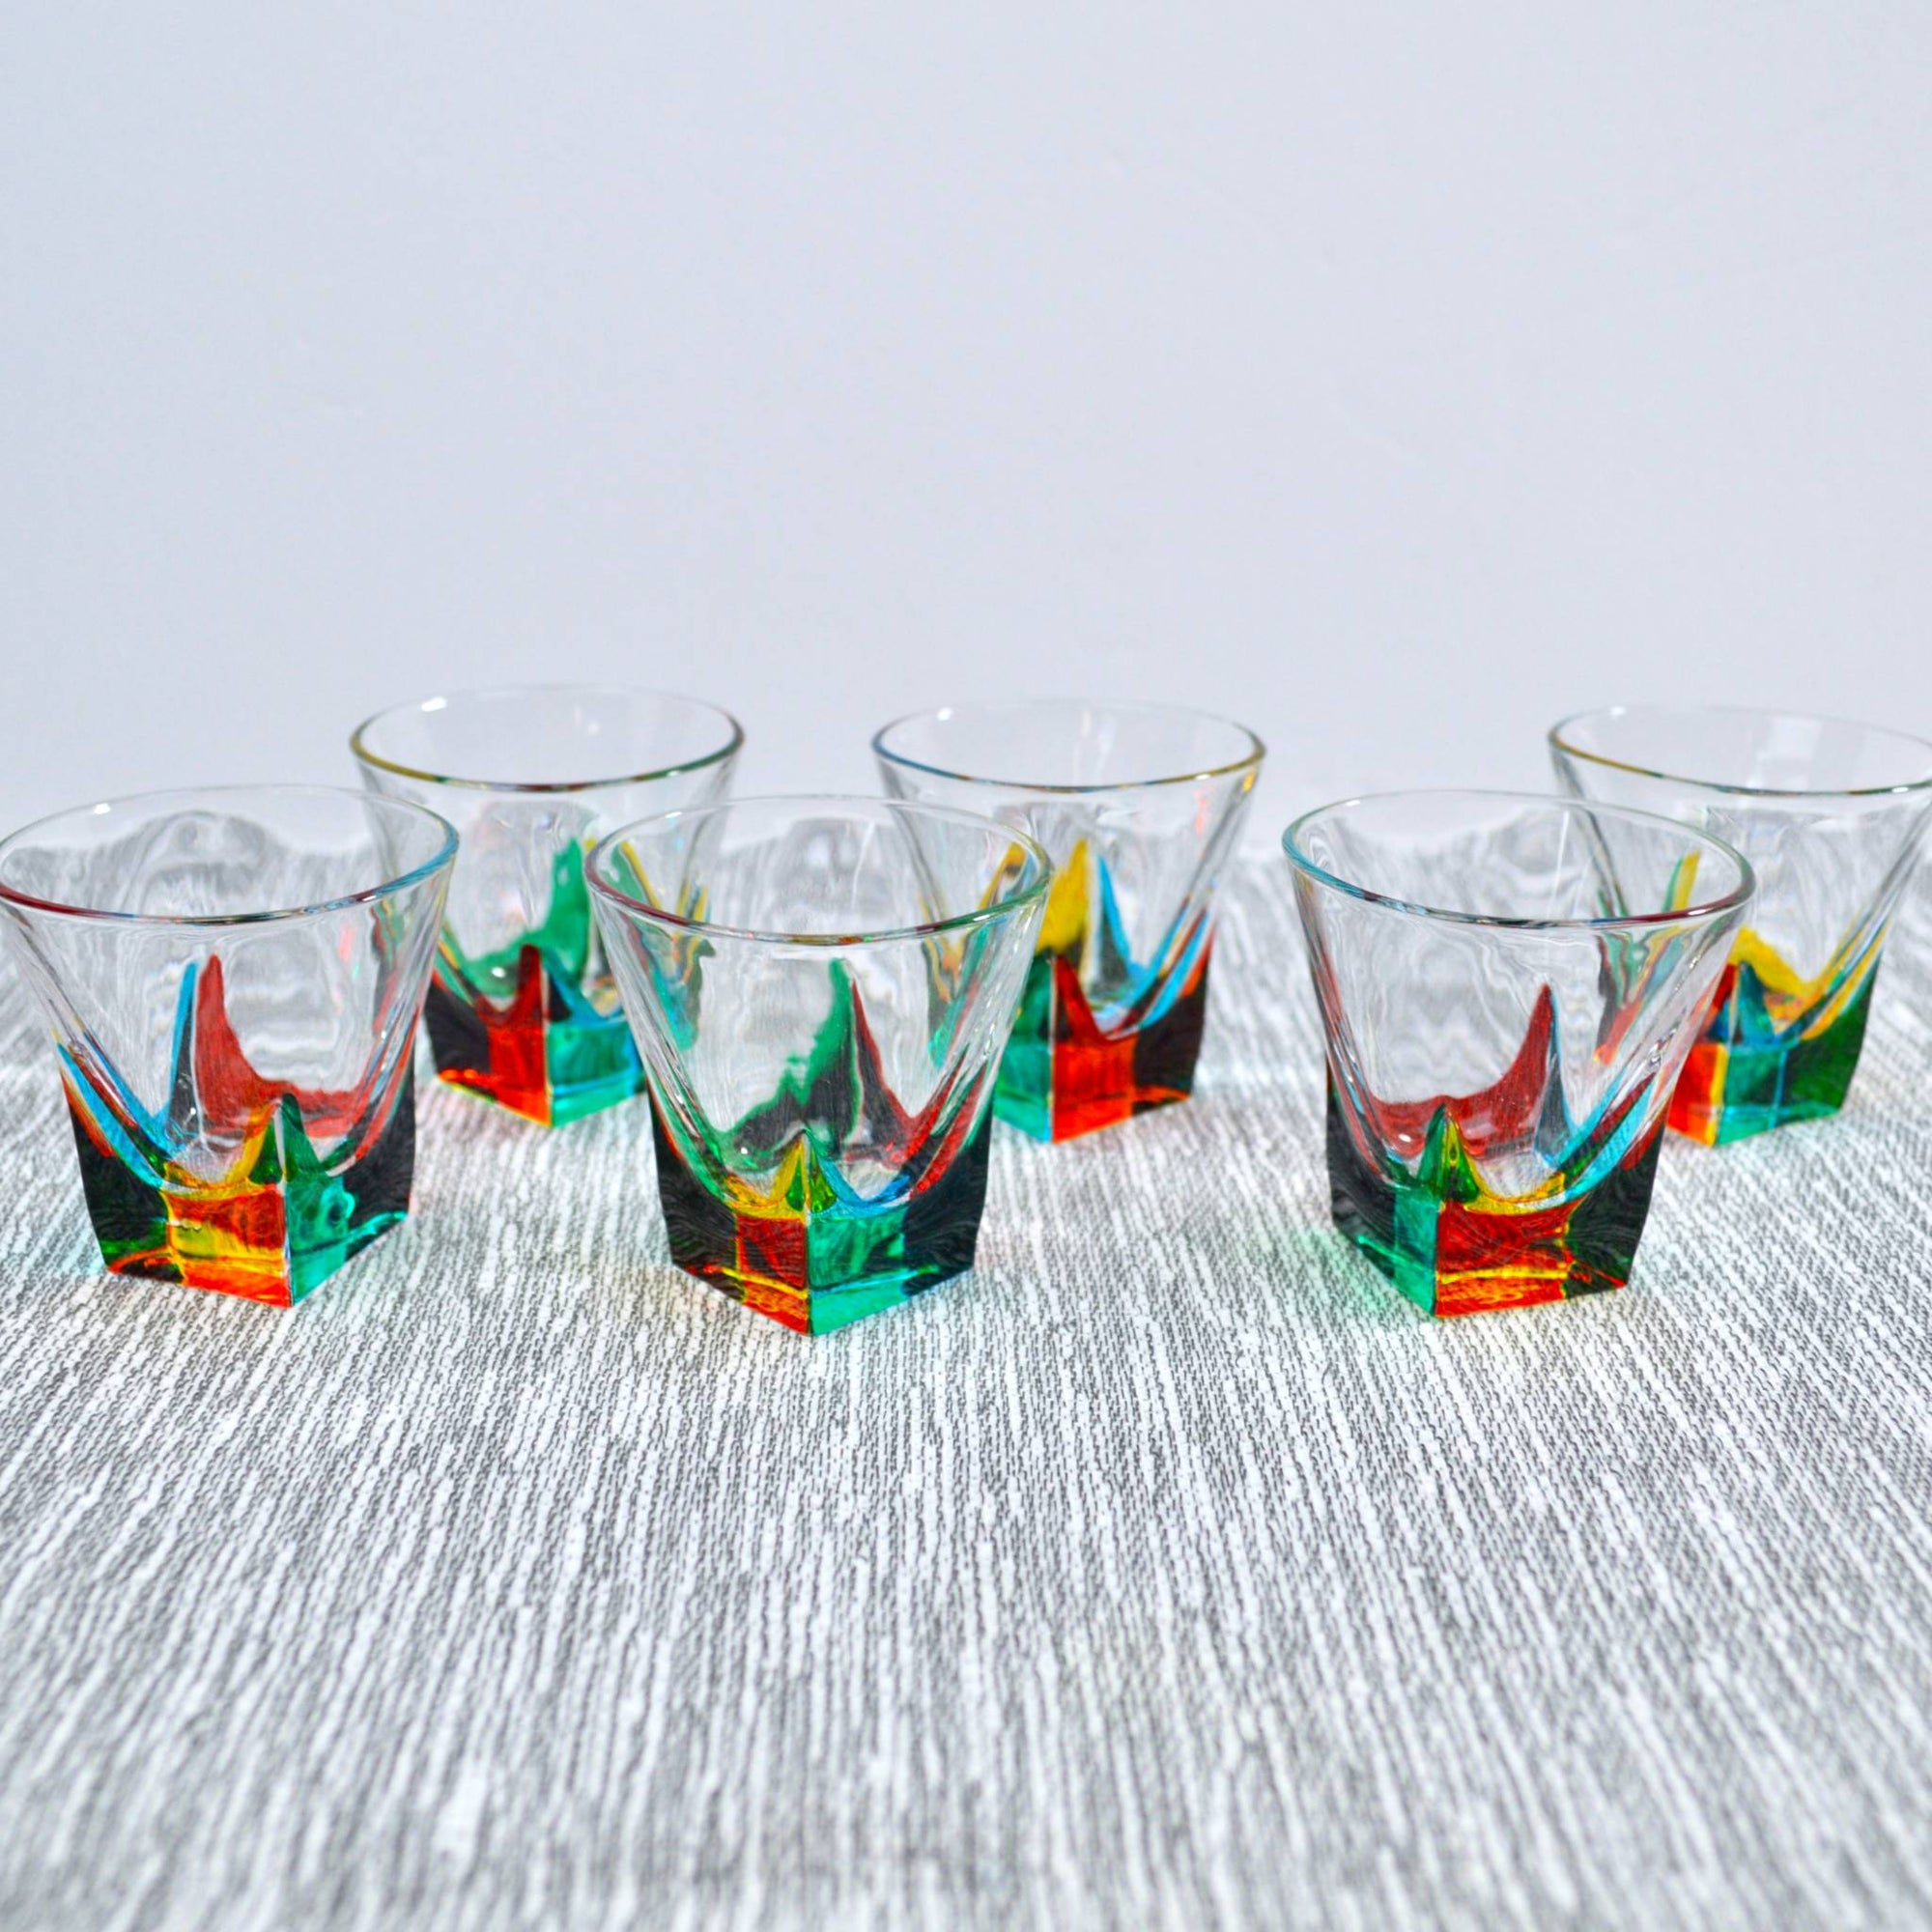 Fusion Shot Glasses, Set of 6, Hand Painted Crystal, Made in Italy - My Italian Decor